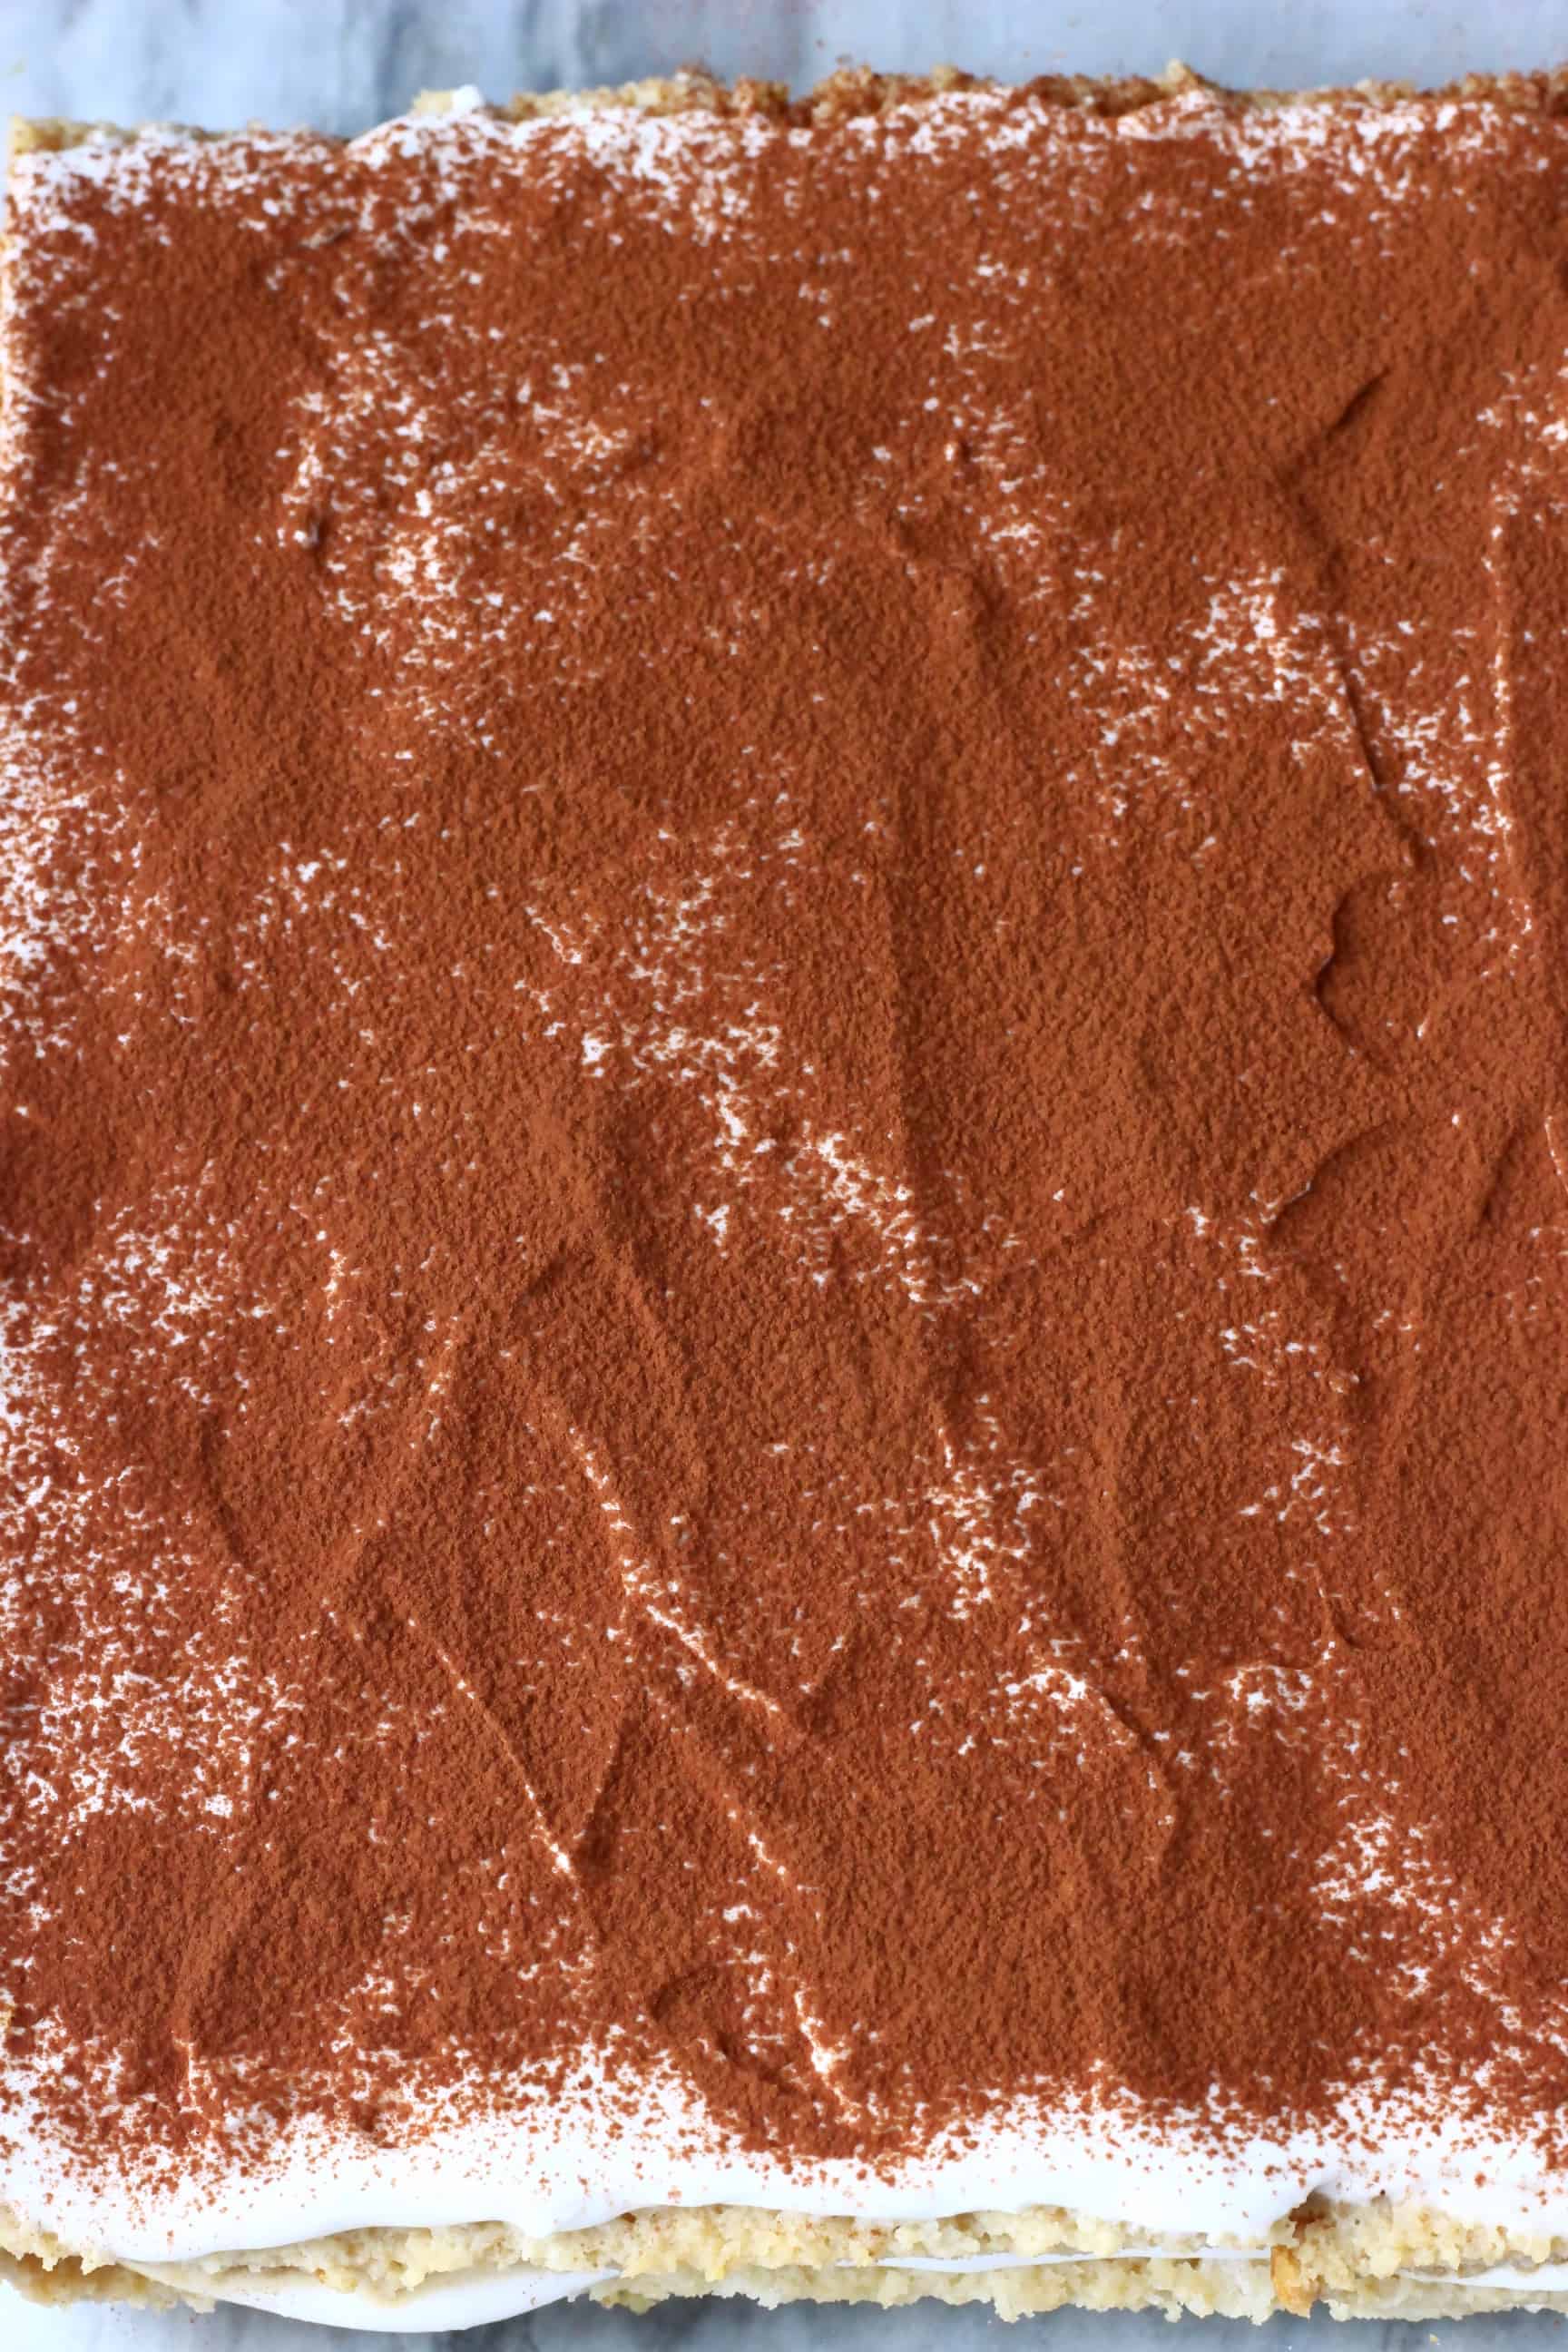 Photo of a large tray of tiramisu sprinkled with cocoa powder taken from above